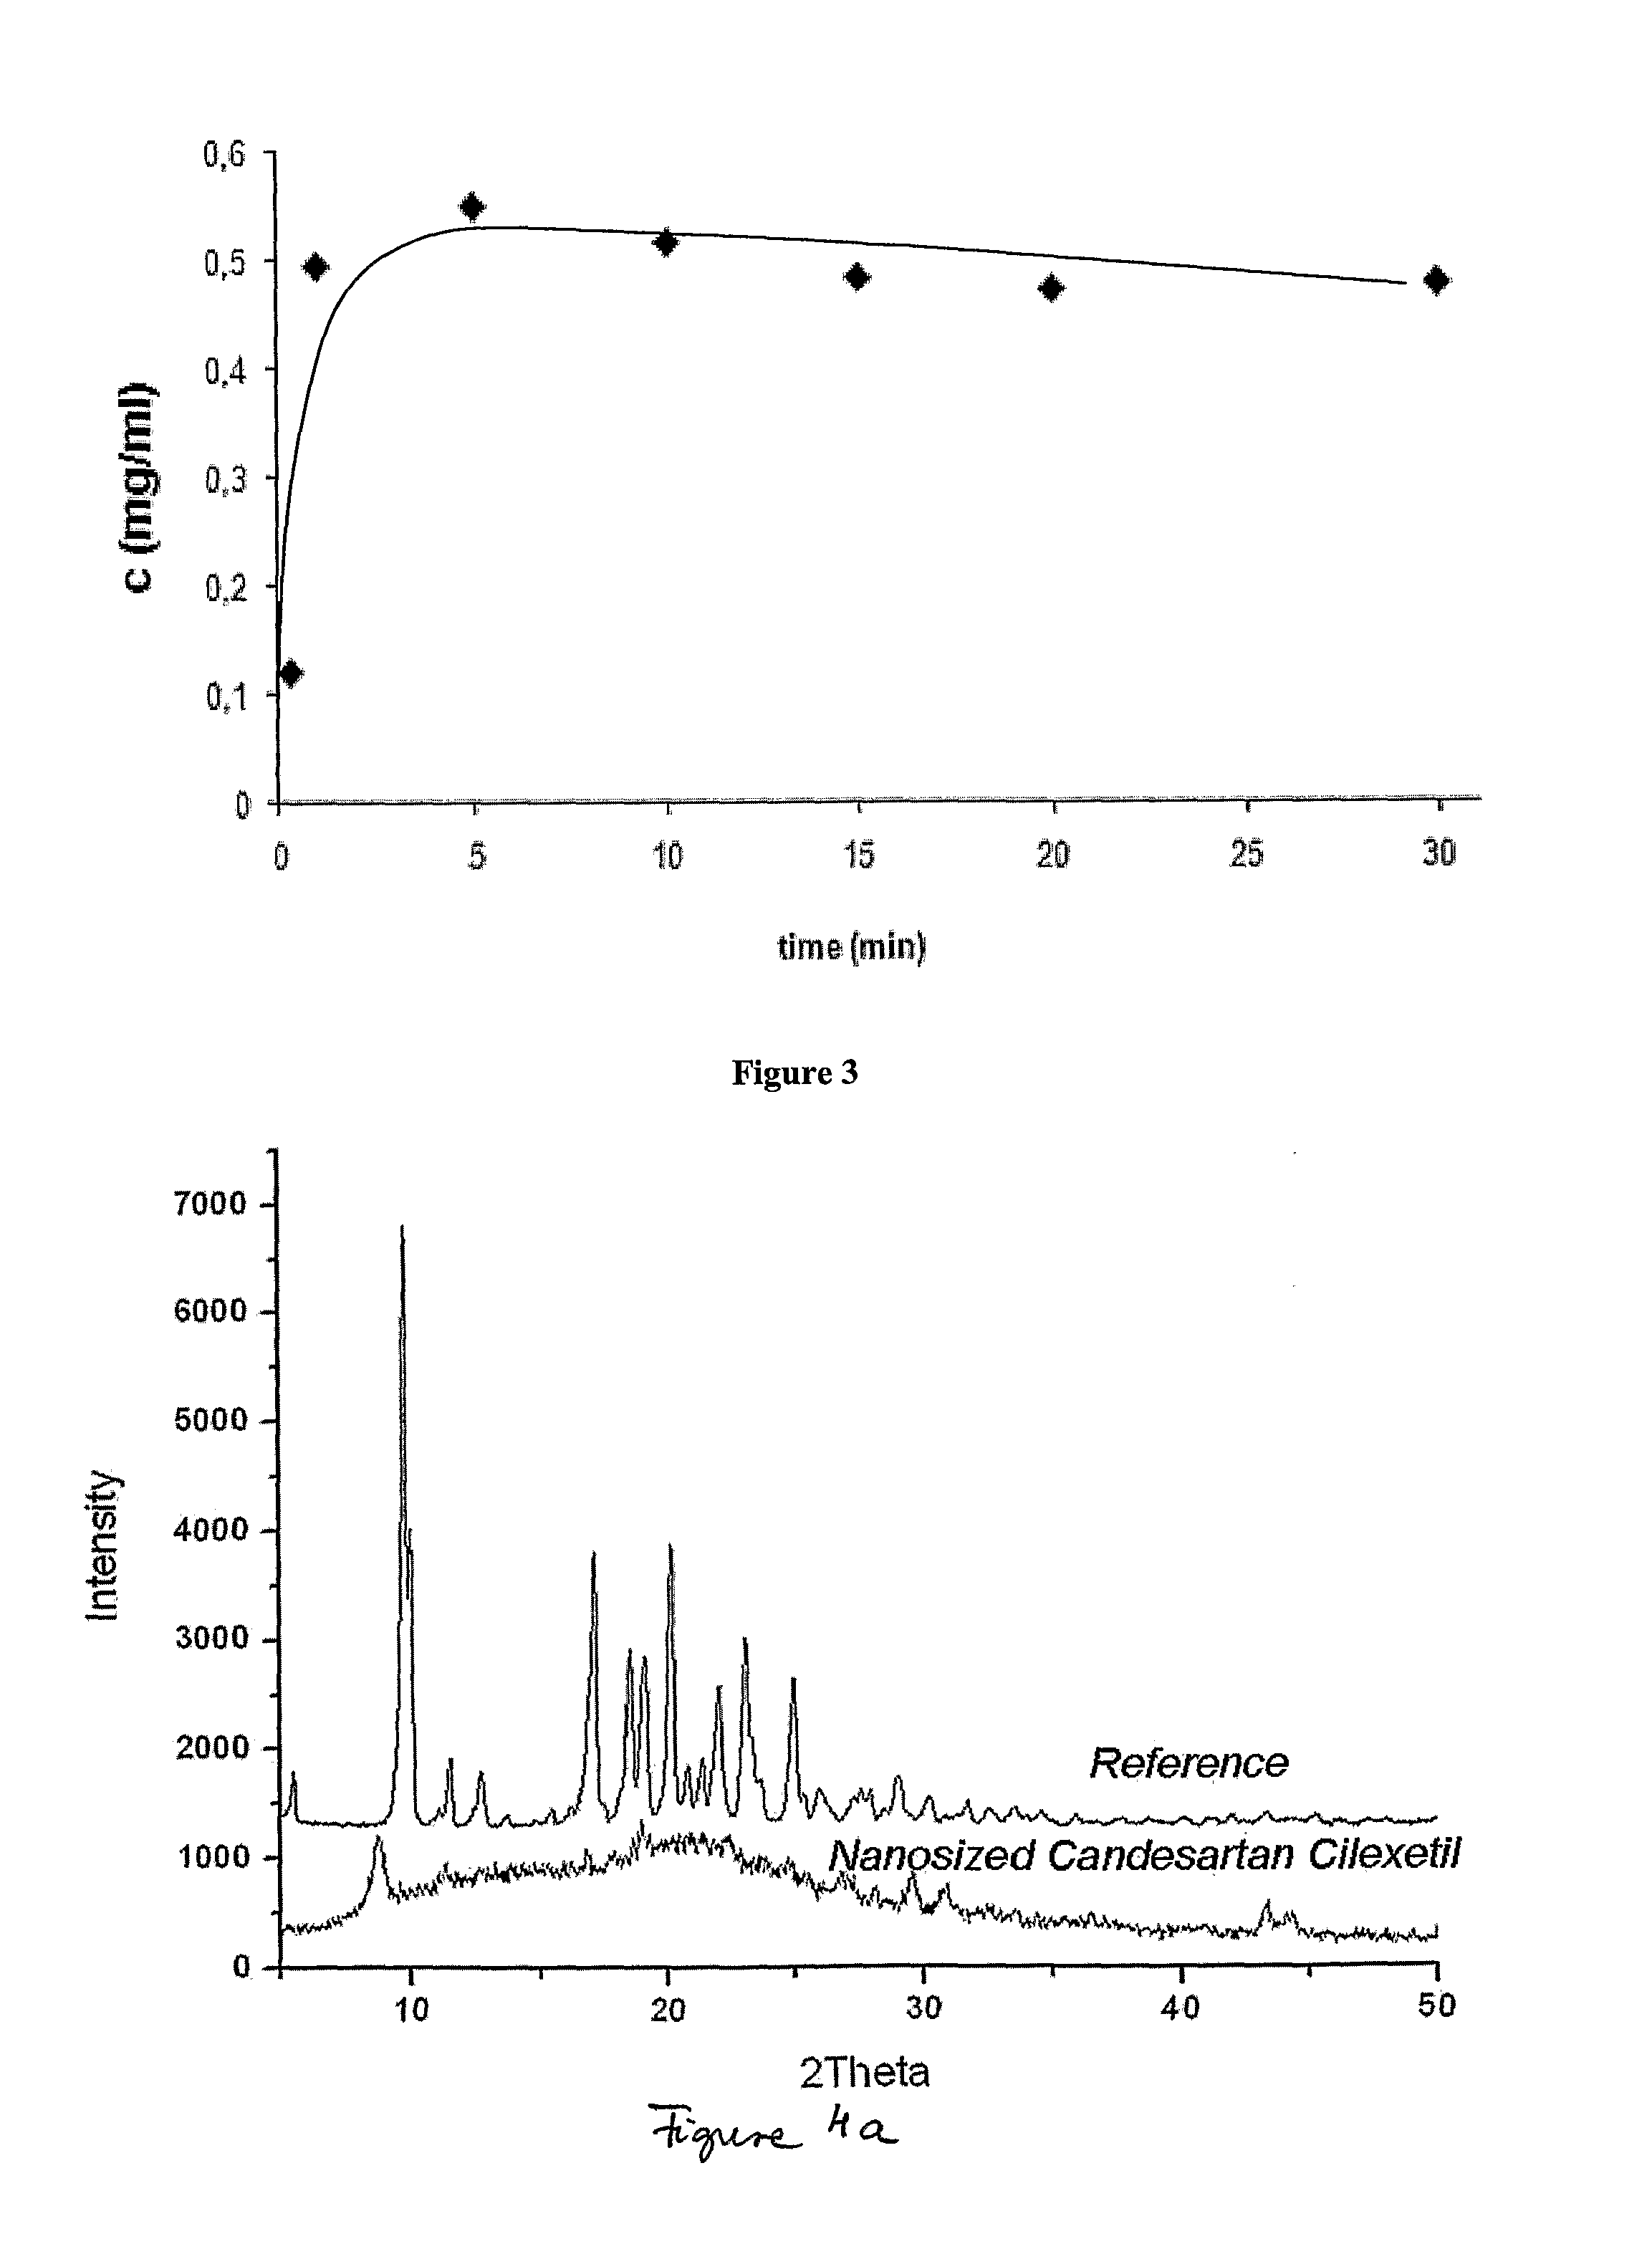 Nanoparticulate candesartan cilexitil compositions, process for the preparation thereof and pharmaceutical compositions containing them